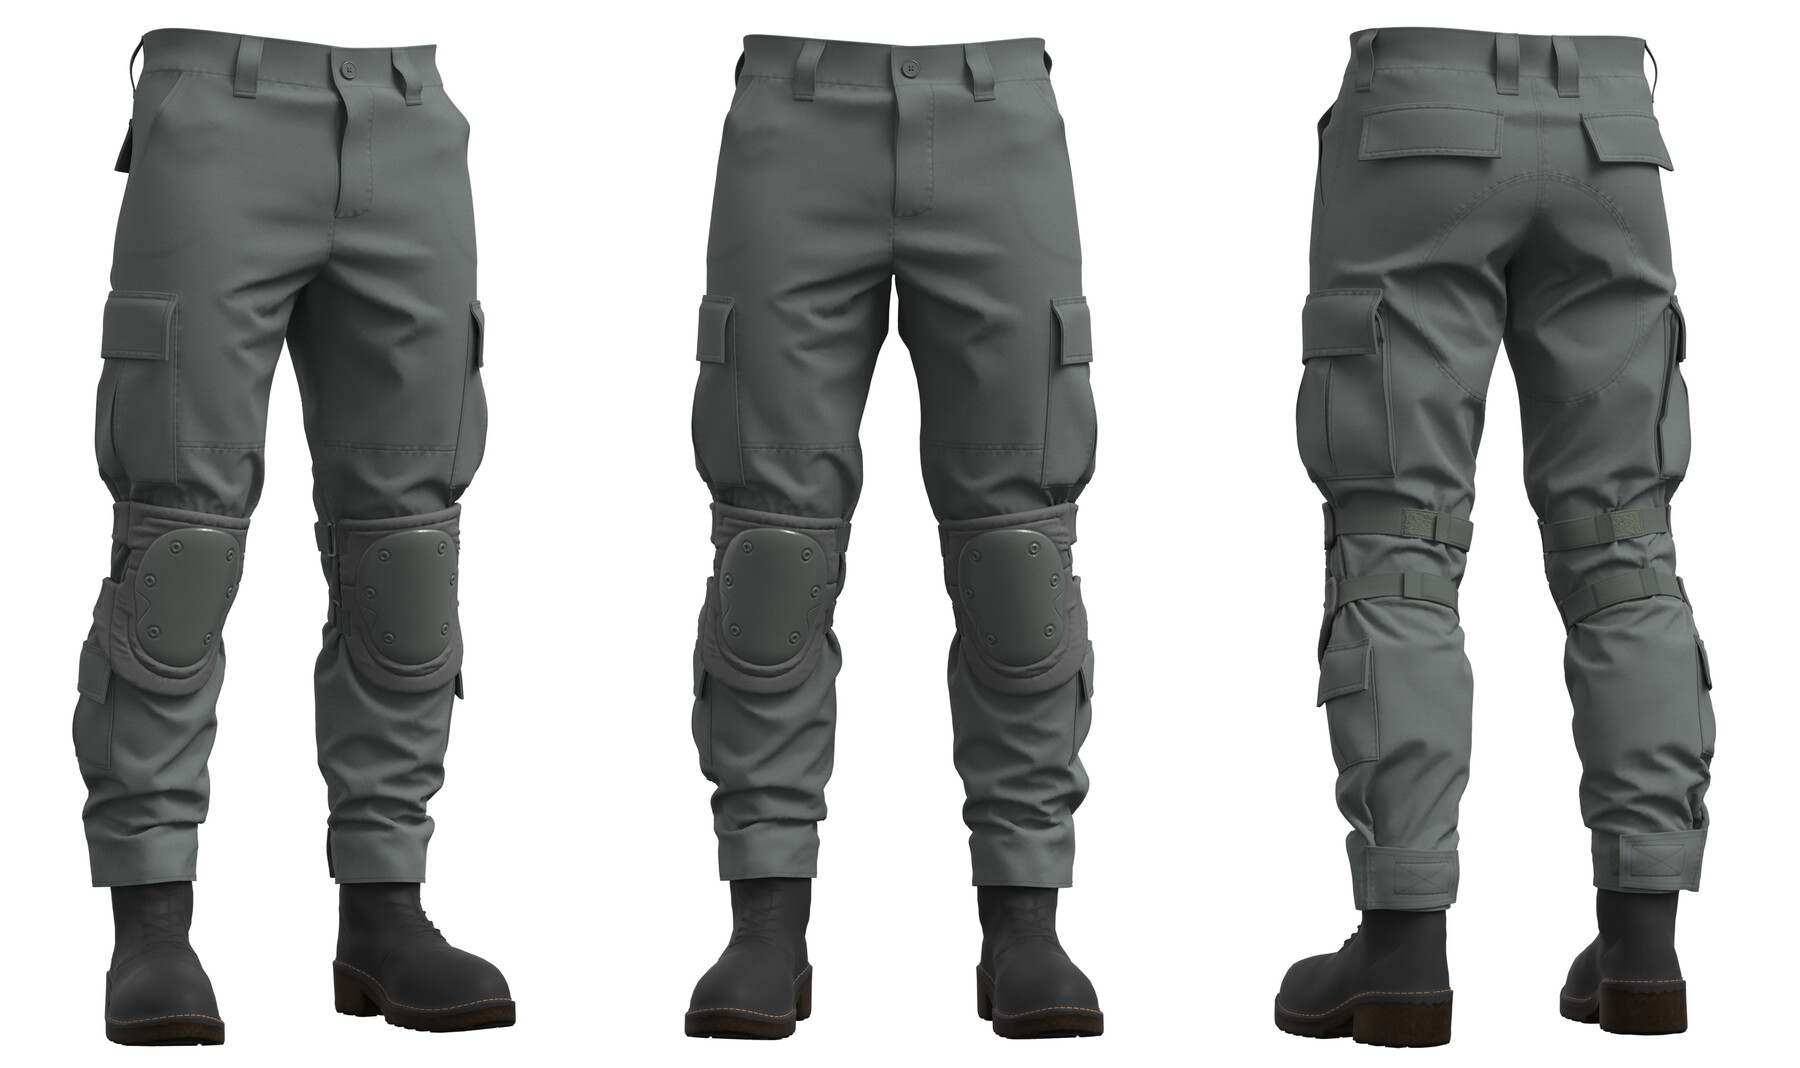 ArtStation - Military Tactical Combat Pants and Knee pad (Marvelous ...